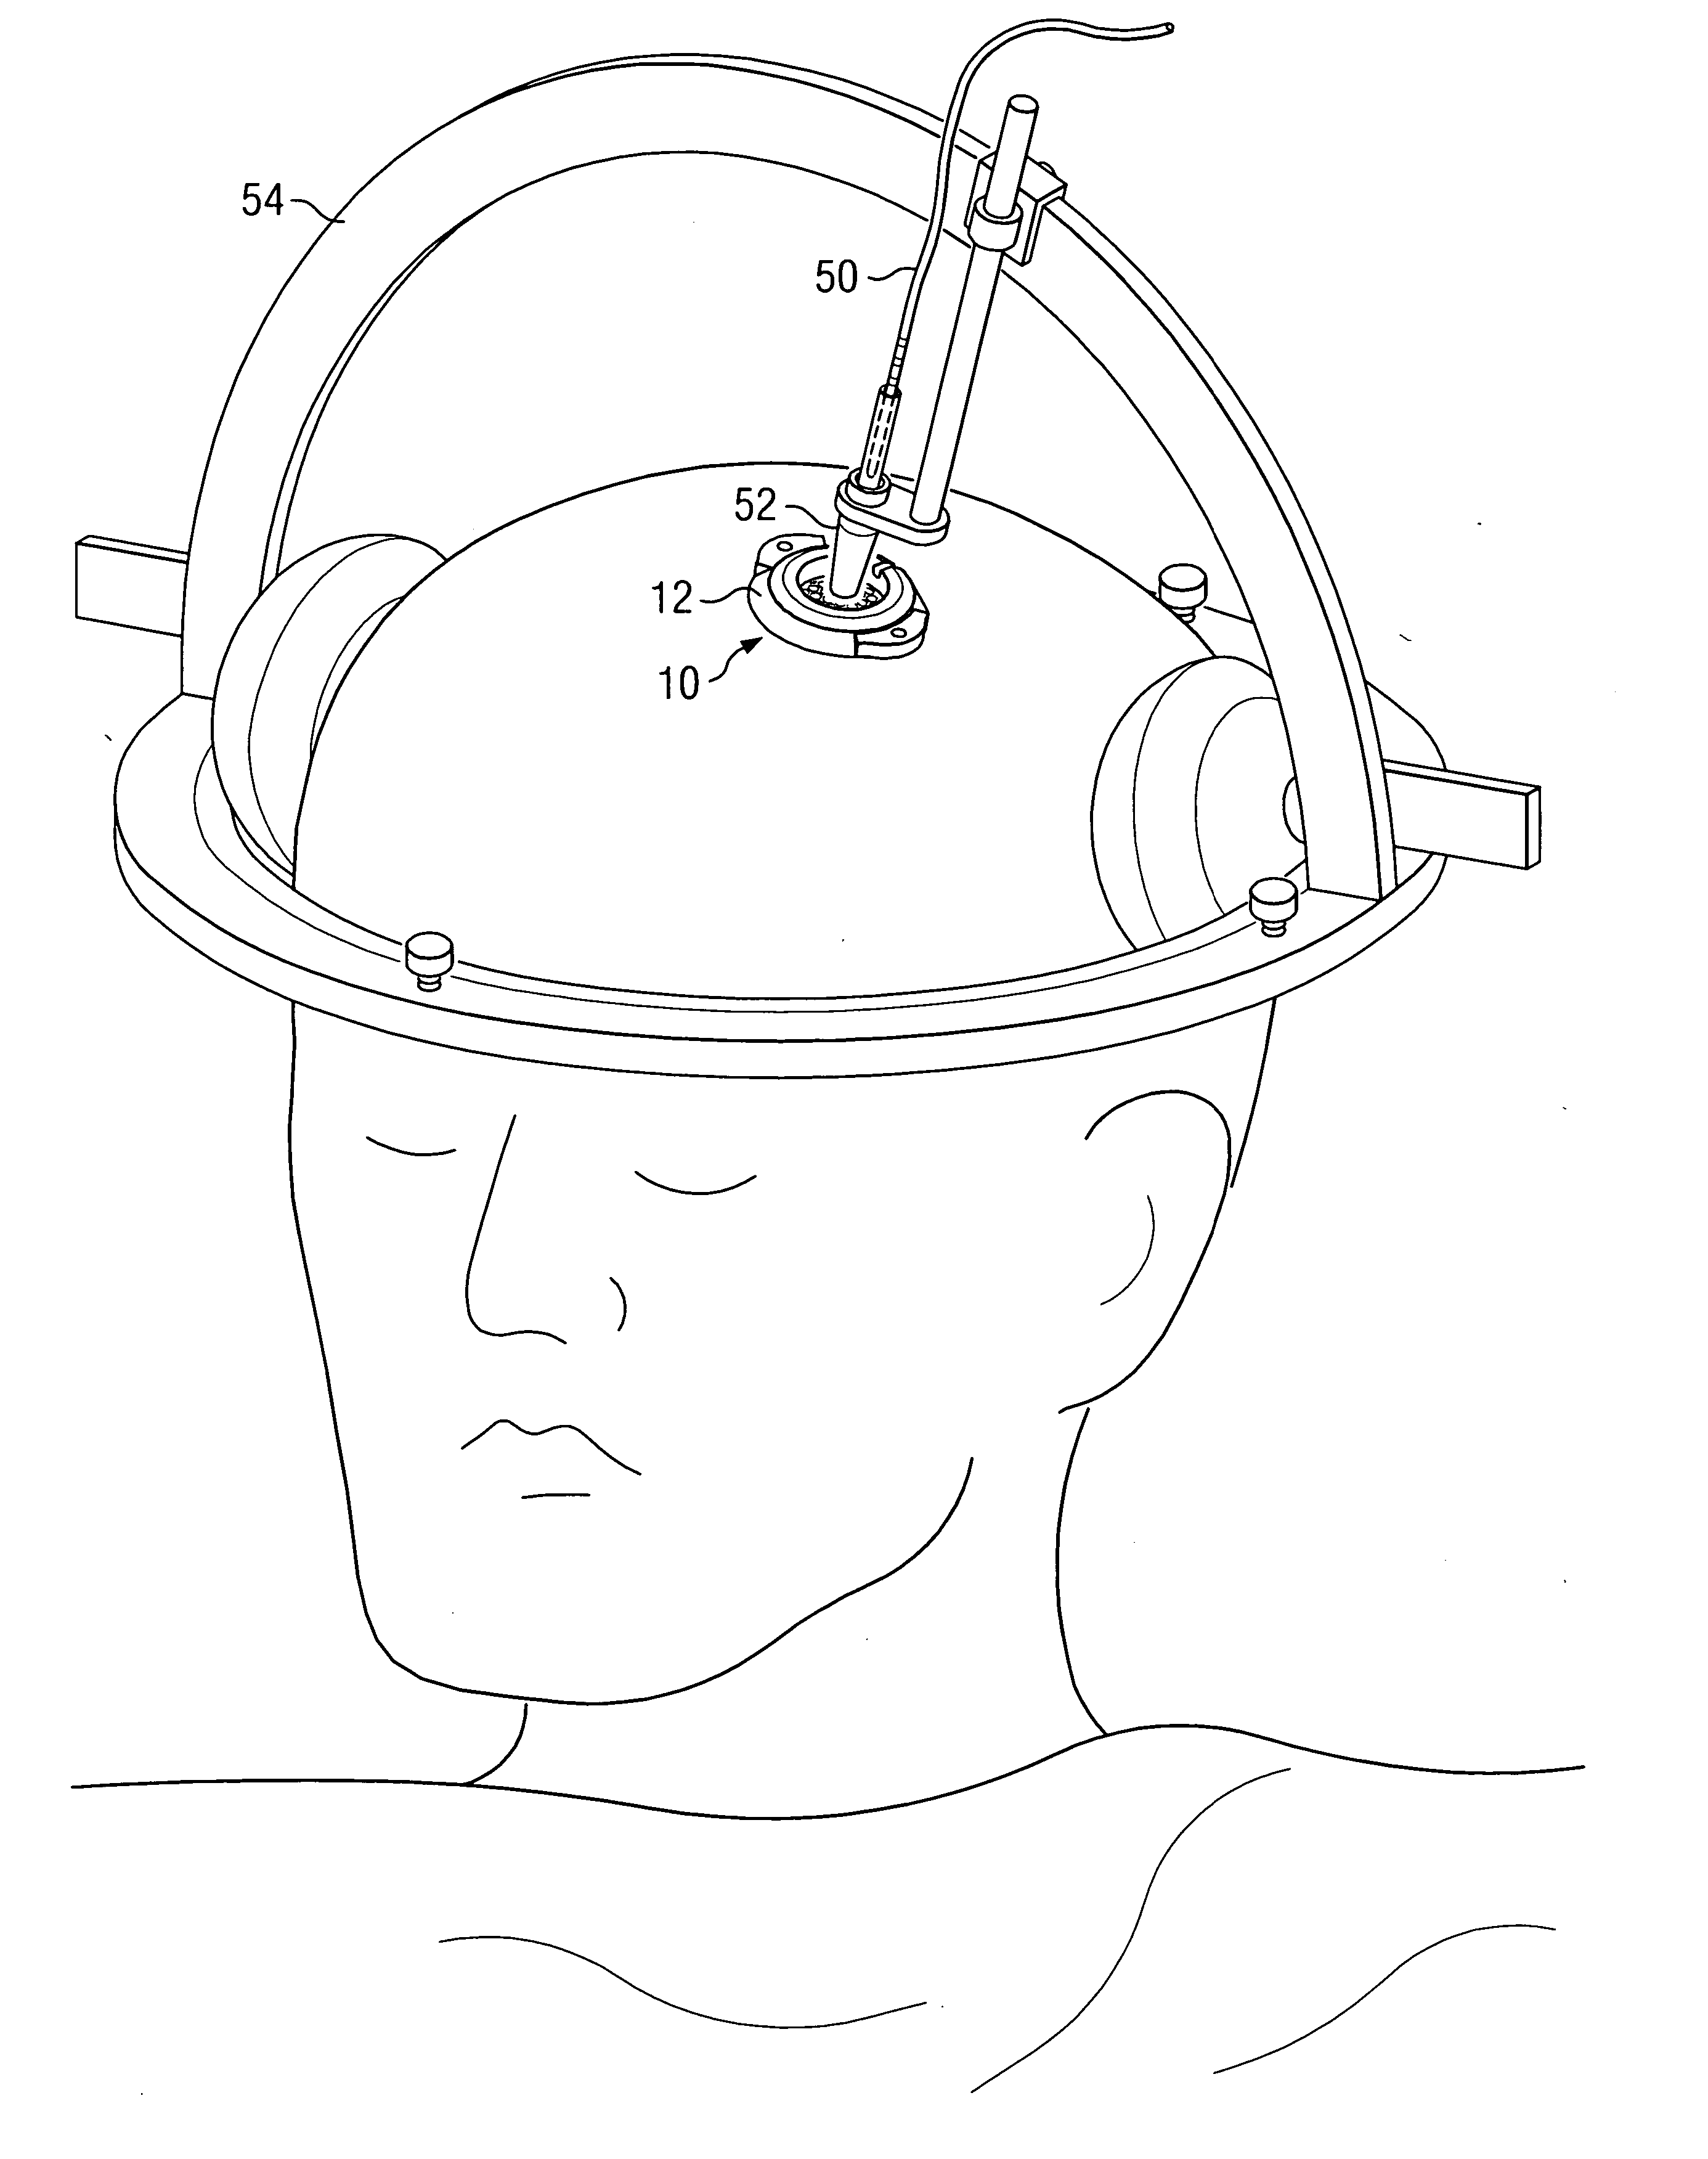 Electrical stimulation system and associated apparatus for securing an electrical stimulation lead in position in a person's brain